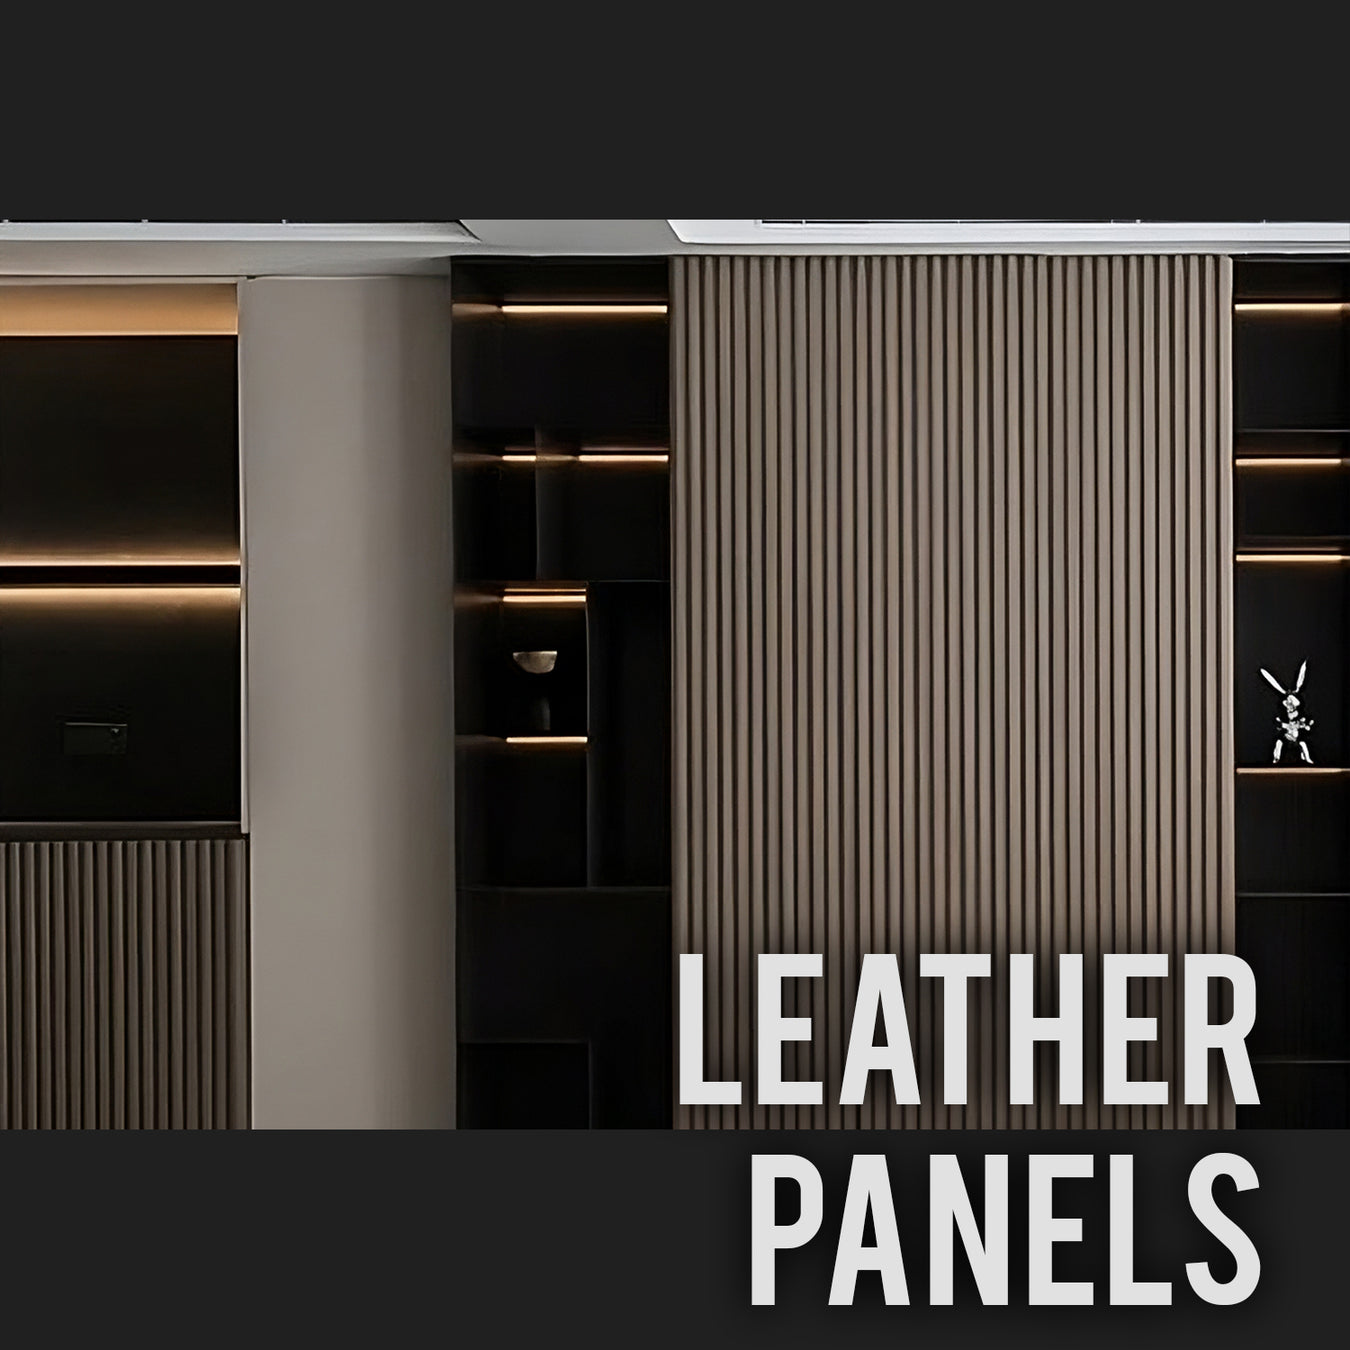 Kings Leather Panels